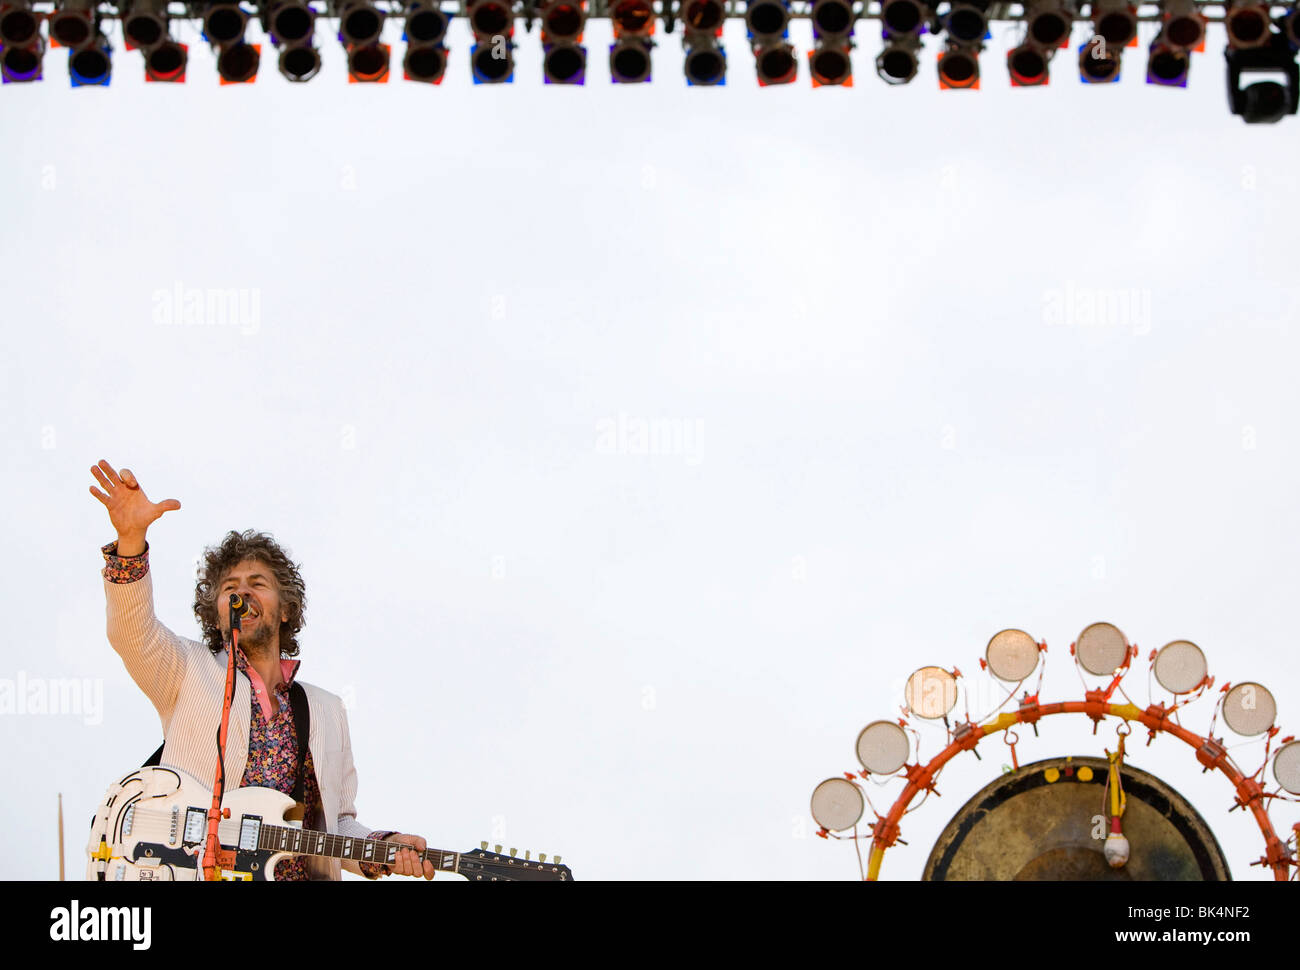 Wayne Coyne of the Flaming Lips performs during a concert. Stock Photo